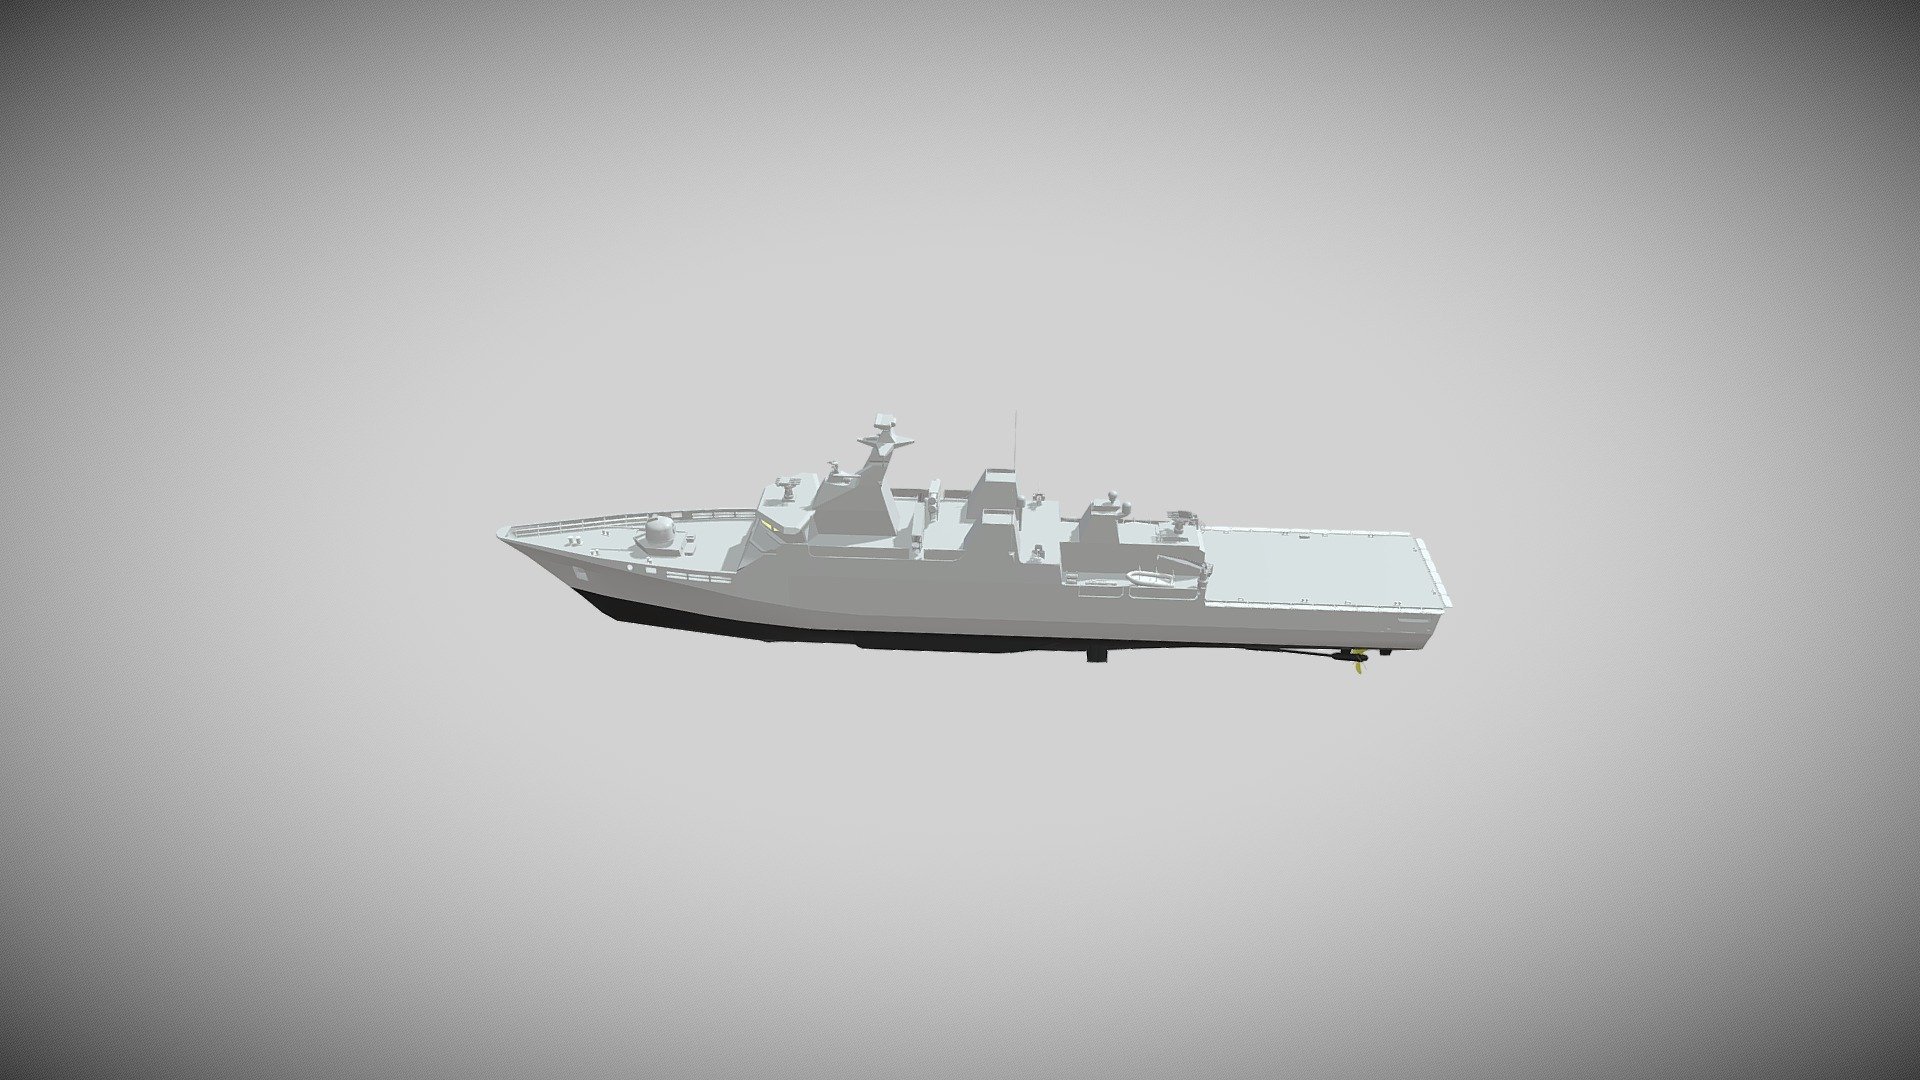 The Diponegoro-class guided-missile corvettes of the Indonesian Navy are SIGMA 9113 types of the Netherlands-designed Sigma family of modular naval vessels, named after Indonesian Prince Diponegoro. Currently there are 4 Diponegoro-class corvette in service 3d model